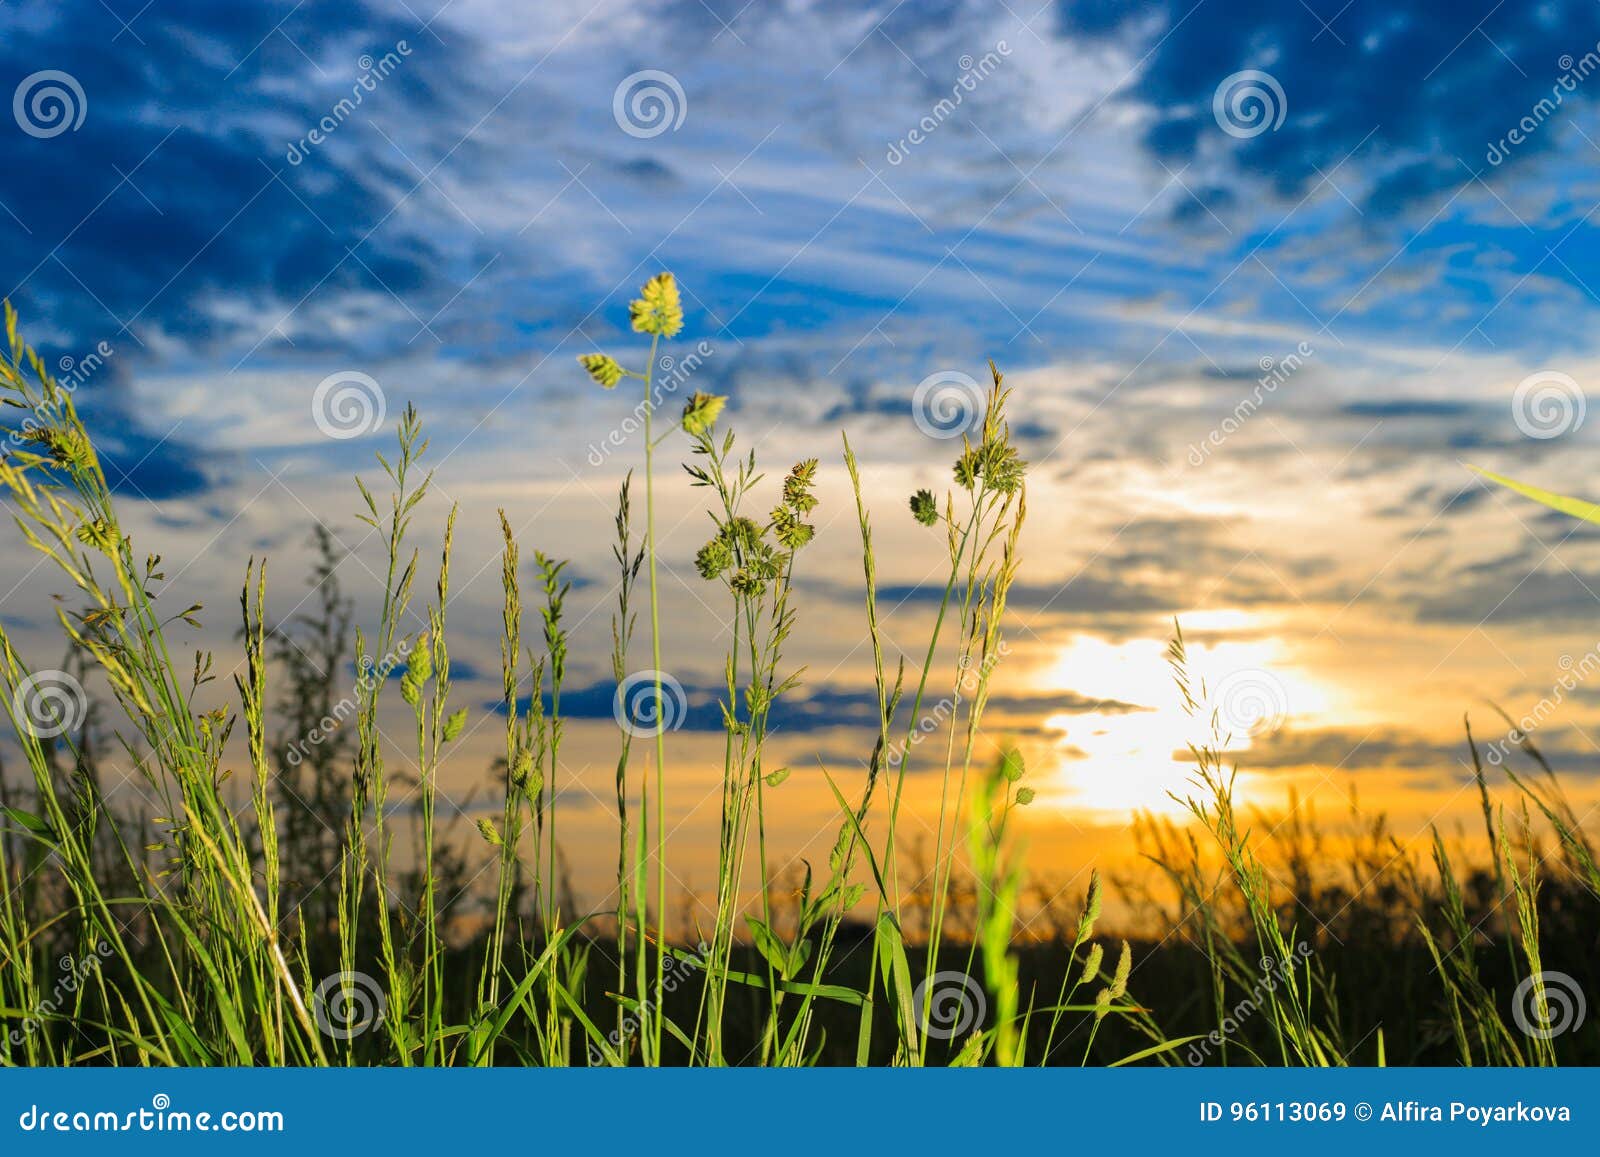 Fresh Dewy Green Grass At Sunrise. Stock Image - Image of over